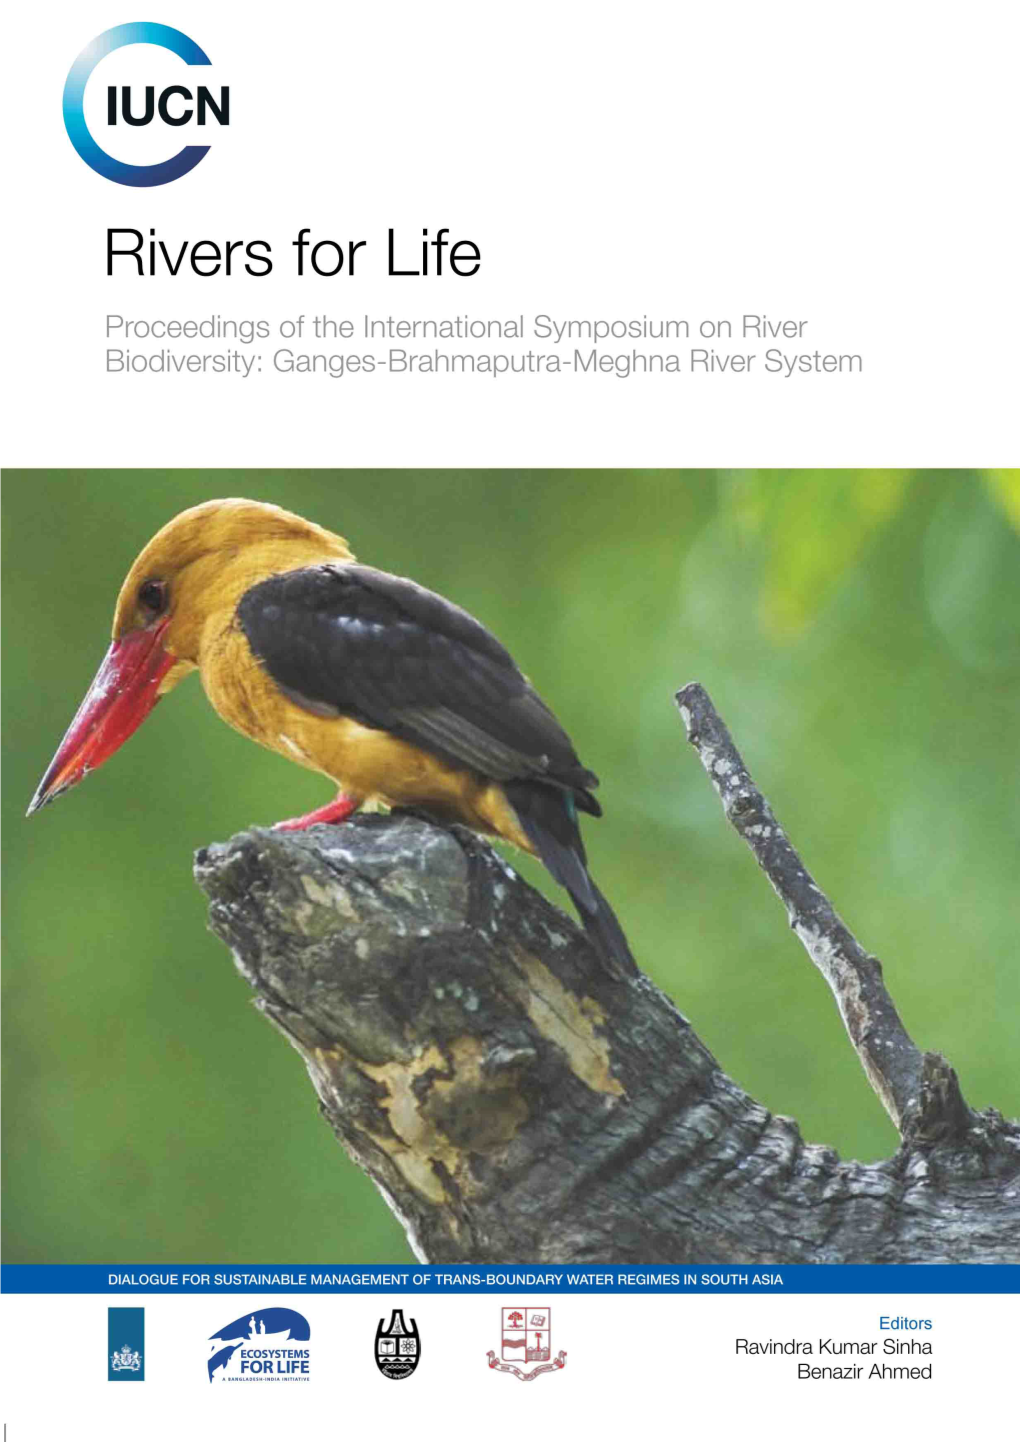 Rivers for Life Proceedings of the International Symposium on River Biodiversity: Ganges-Brahmaputra-Meghna River System